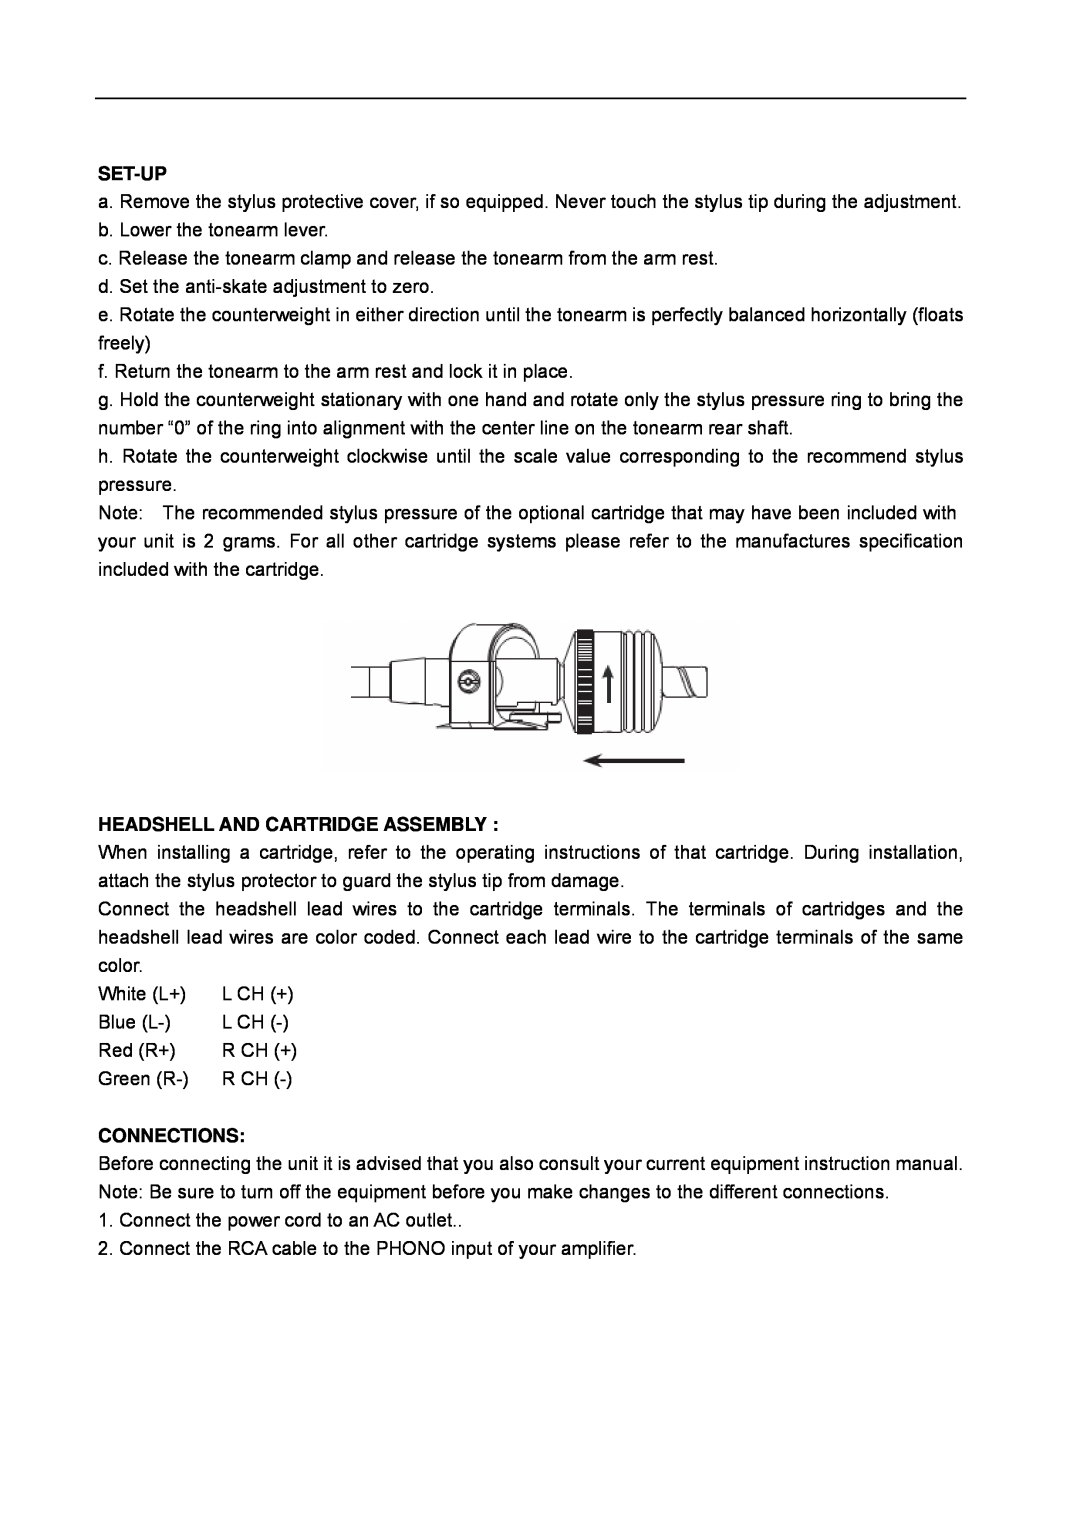 Lenco Marine L-80 USB user manual Set-Up, Headshell And Cartridge Assembly, Connections 